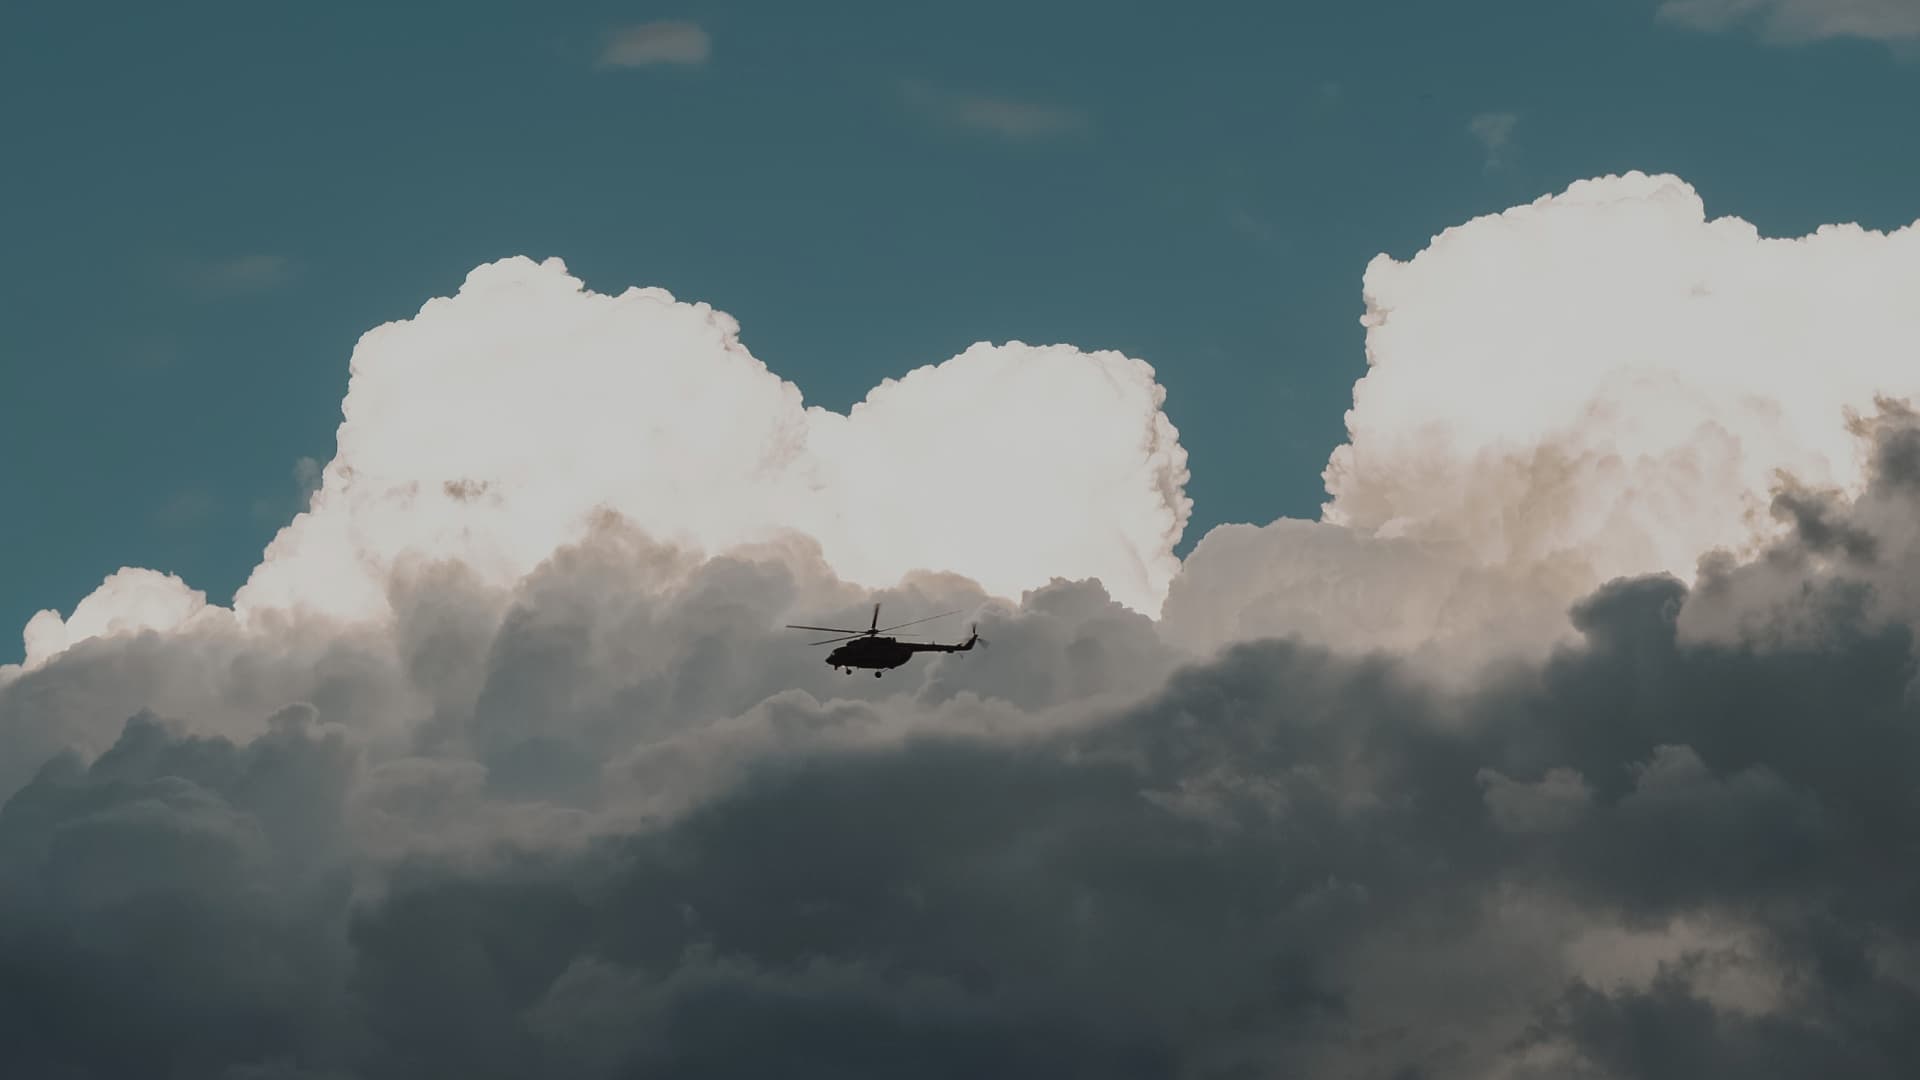 Helicopter flying near massive clouds